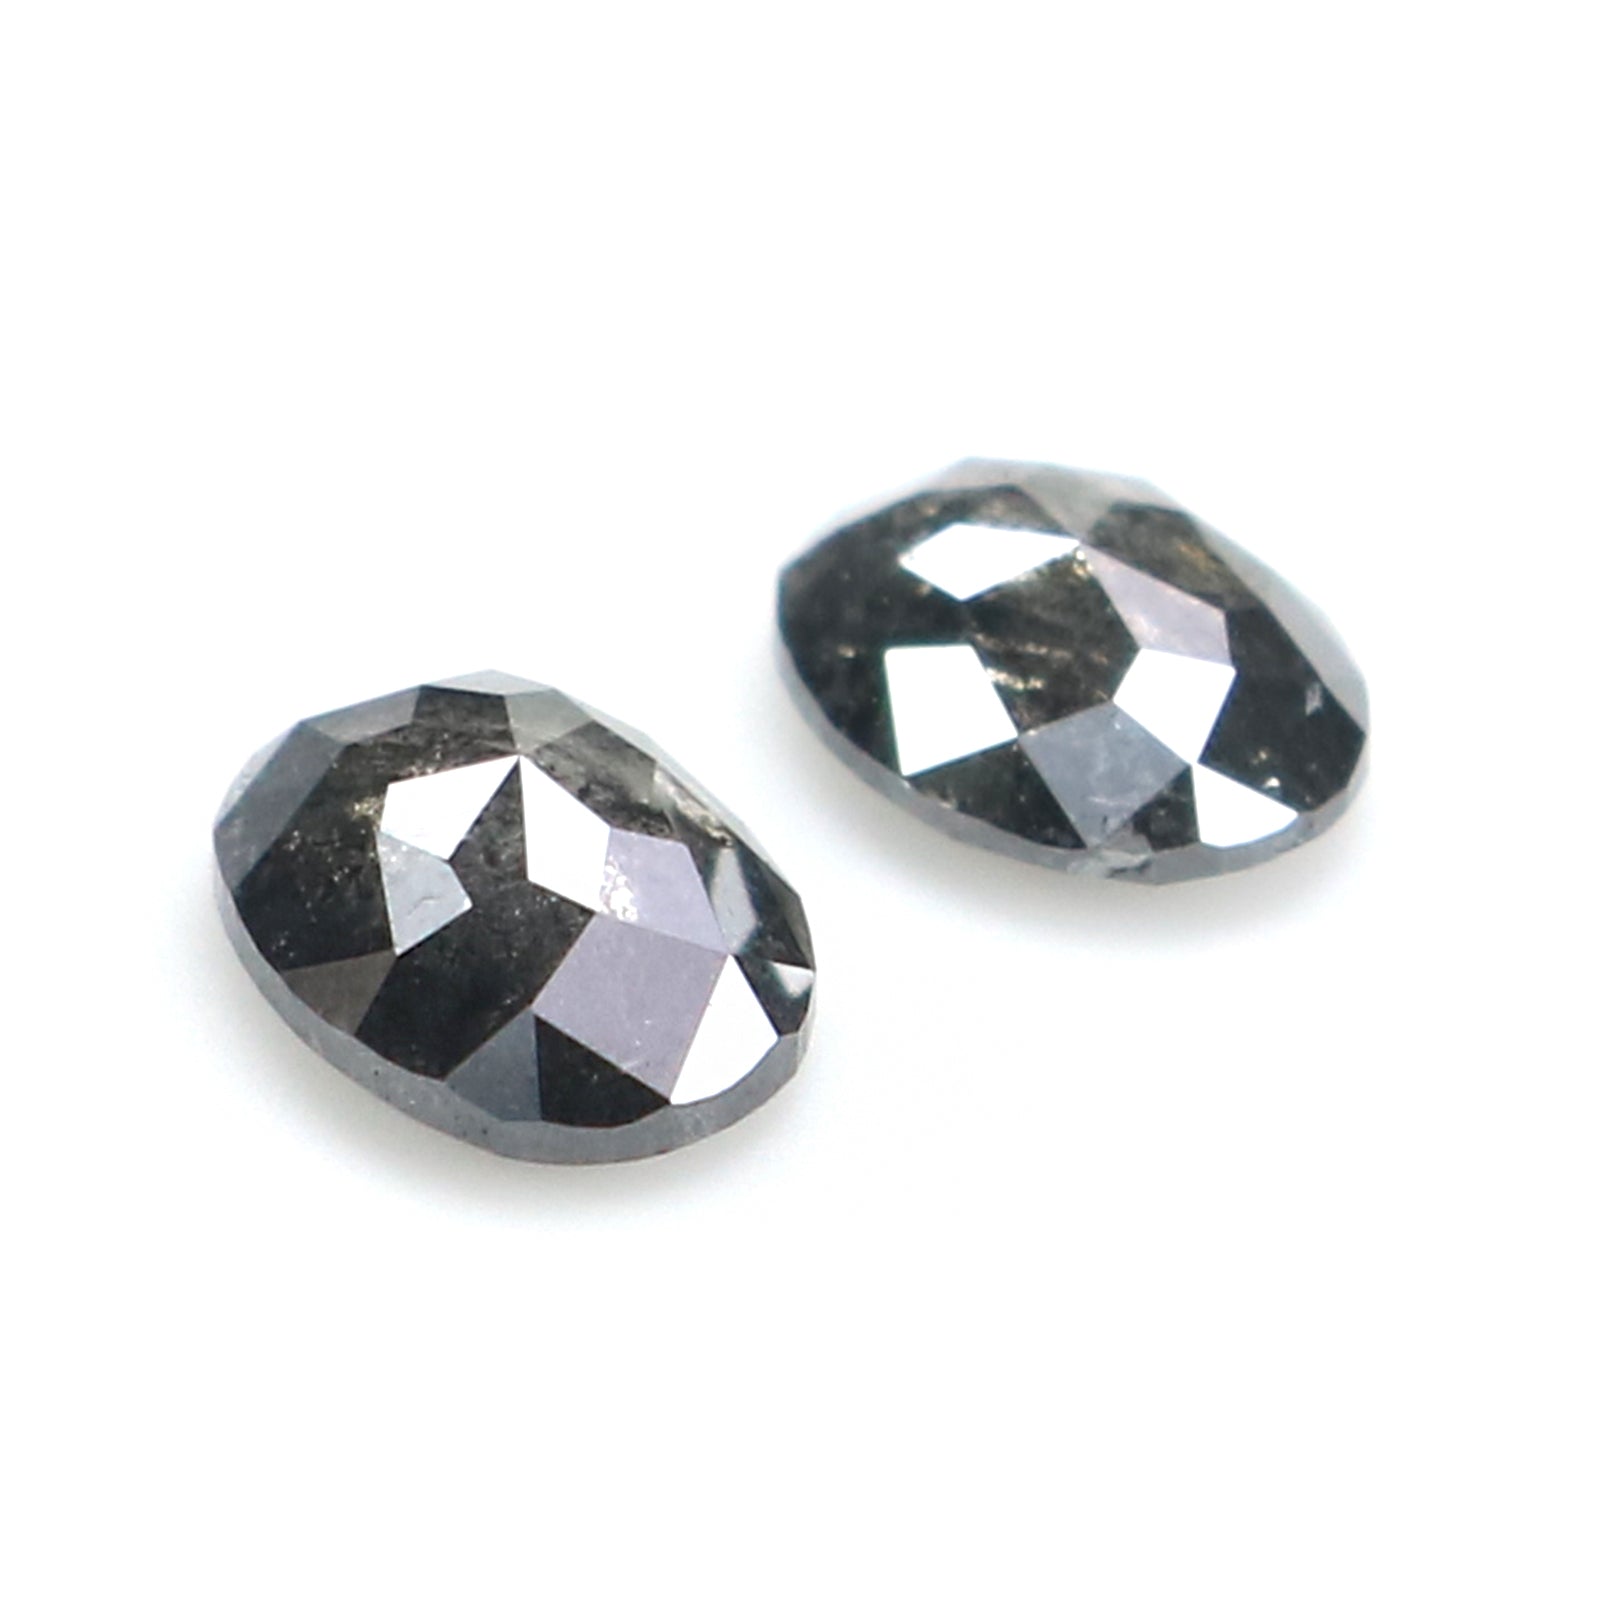 0.60 CT Natural Loose Oval Pair Diamond Black Grey Color Oval Cut Diamond 4.75 MM Salt And Pepper Oval Diamond Oval Cut Pair Diamond LQ2558